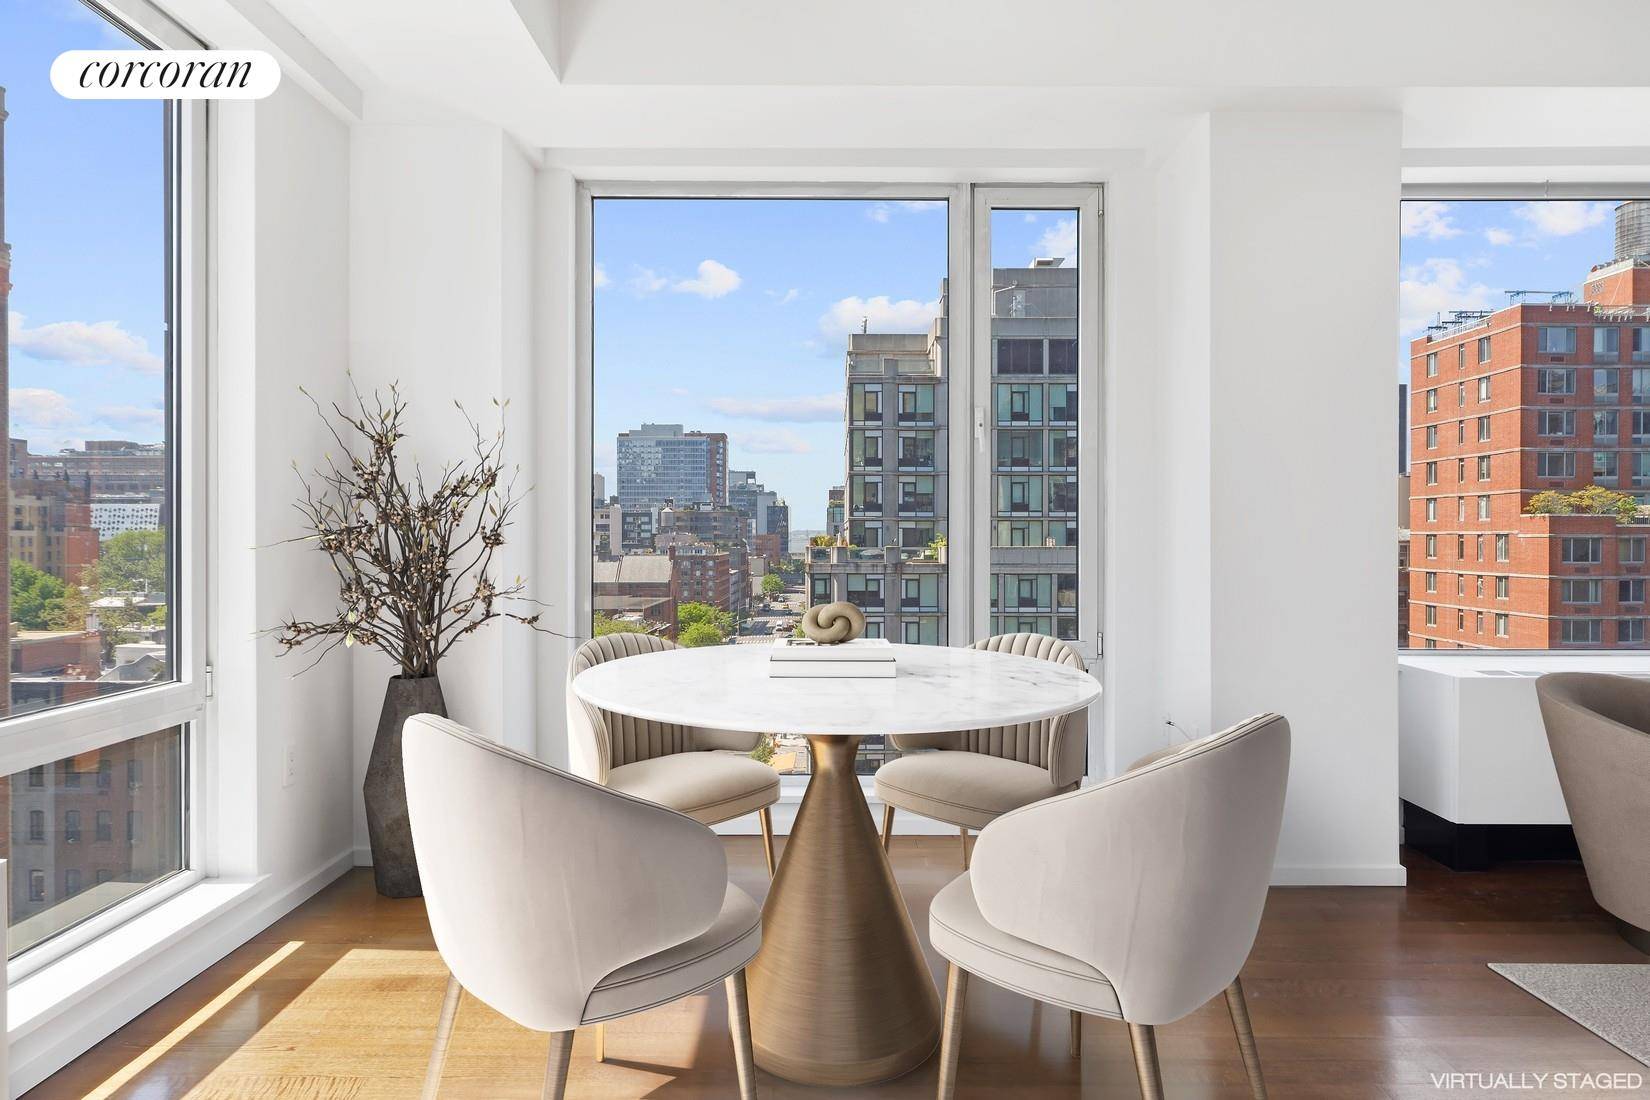 Floating high above the West Chelsea Gallery District and Highline Park, this corner 1, 421sf two bedroom and two bath doorman condominium offers open views over the Chelsea Historic District ...